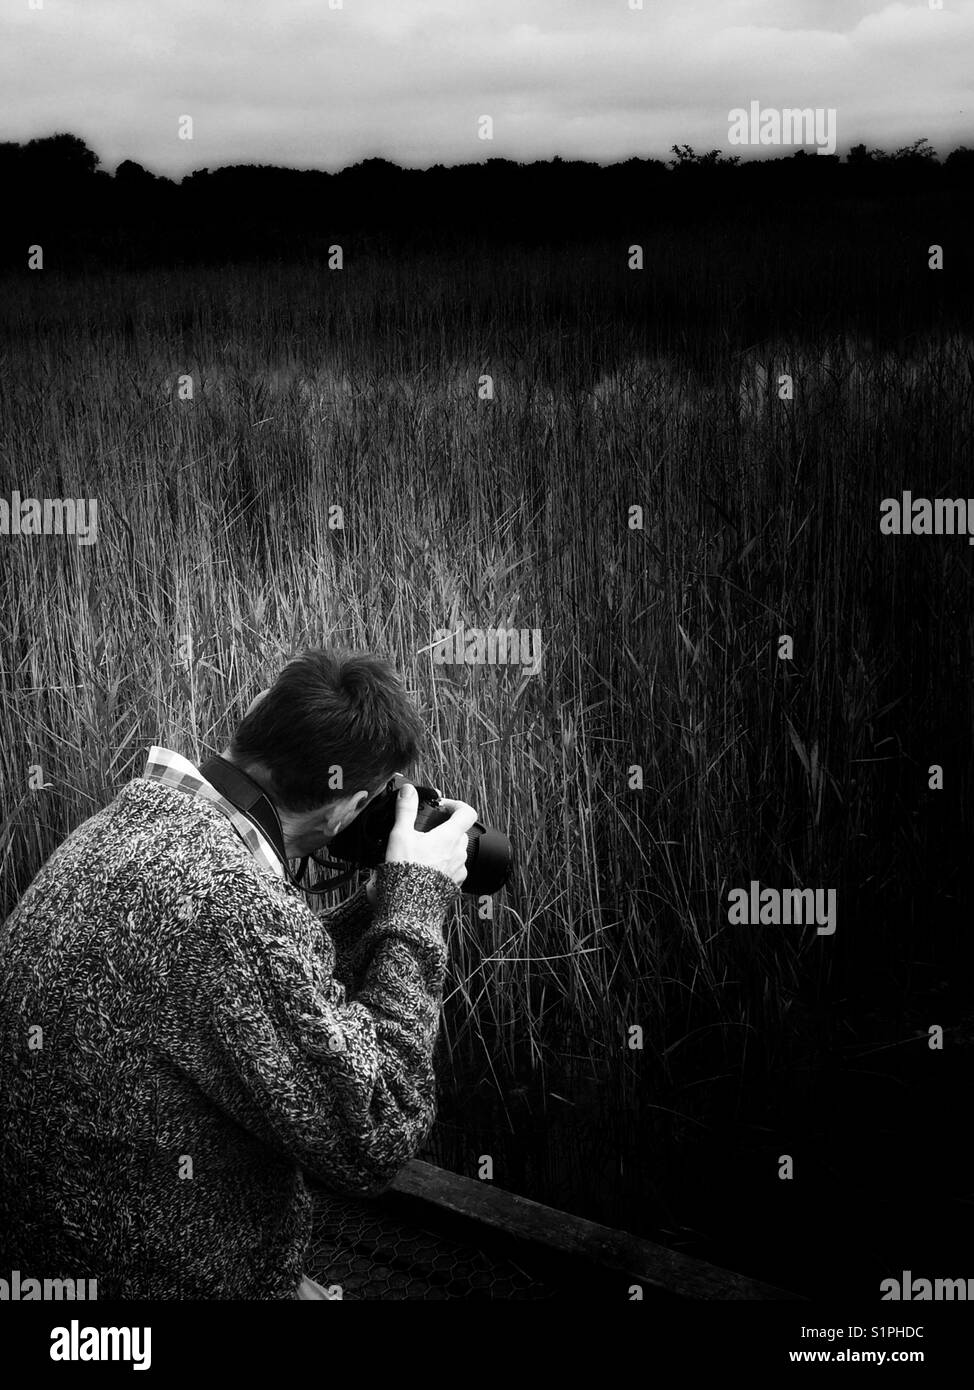 Man taking photographs at a nature park in black and white Stock Photo